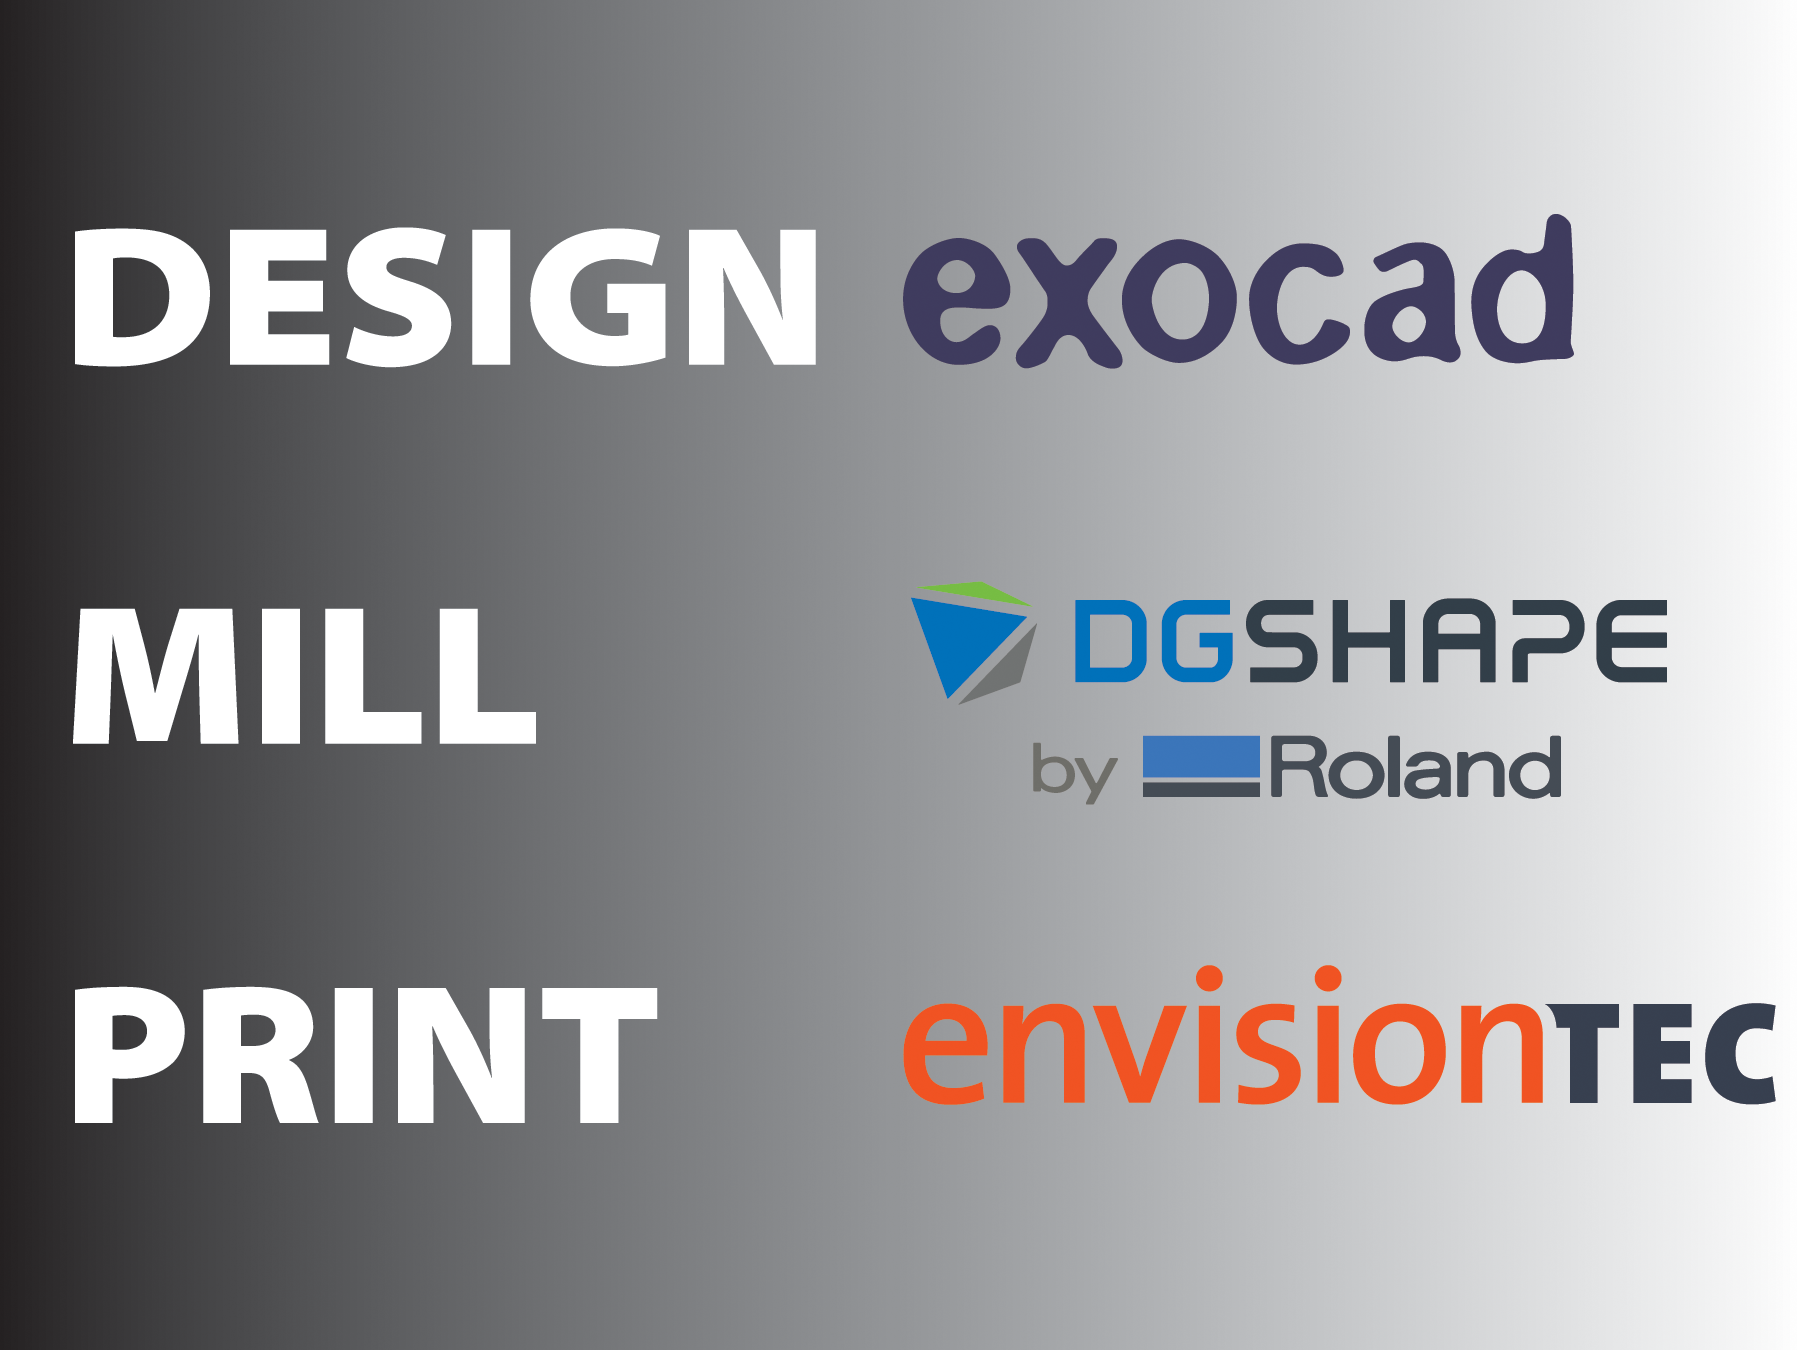 Exocad EnvisionTEC and DGSHAPE